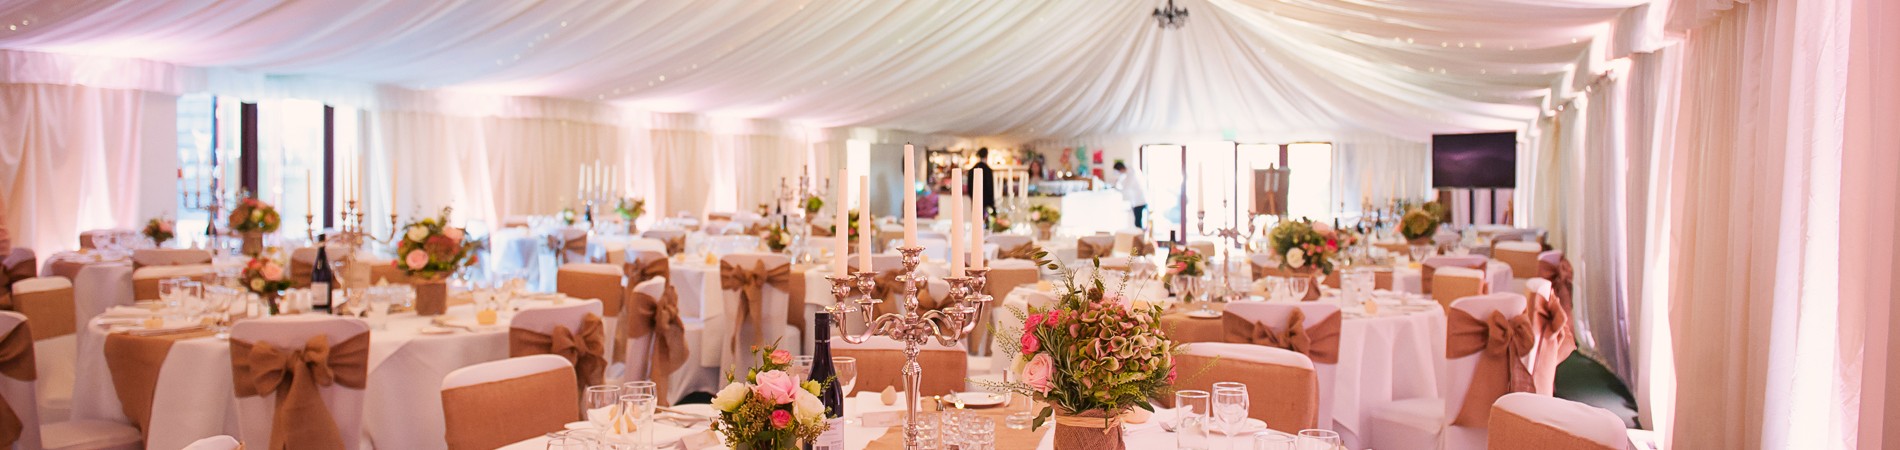 The Venue Overview All Manor Of Events Wedding Venue Ipswich